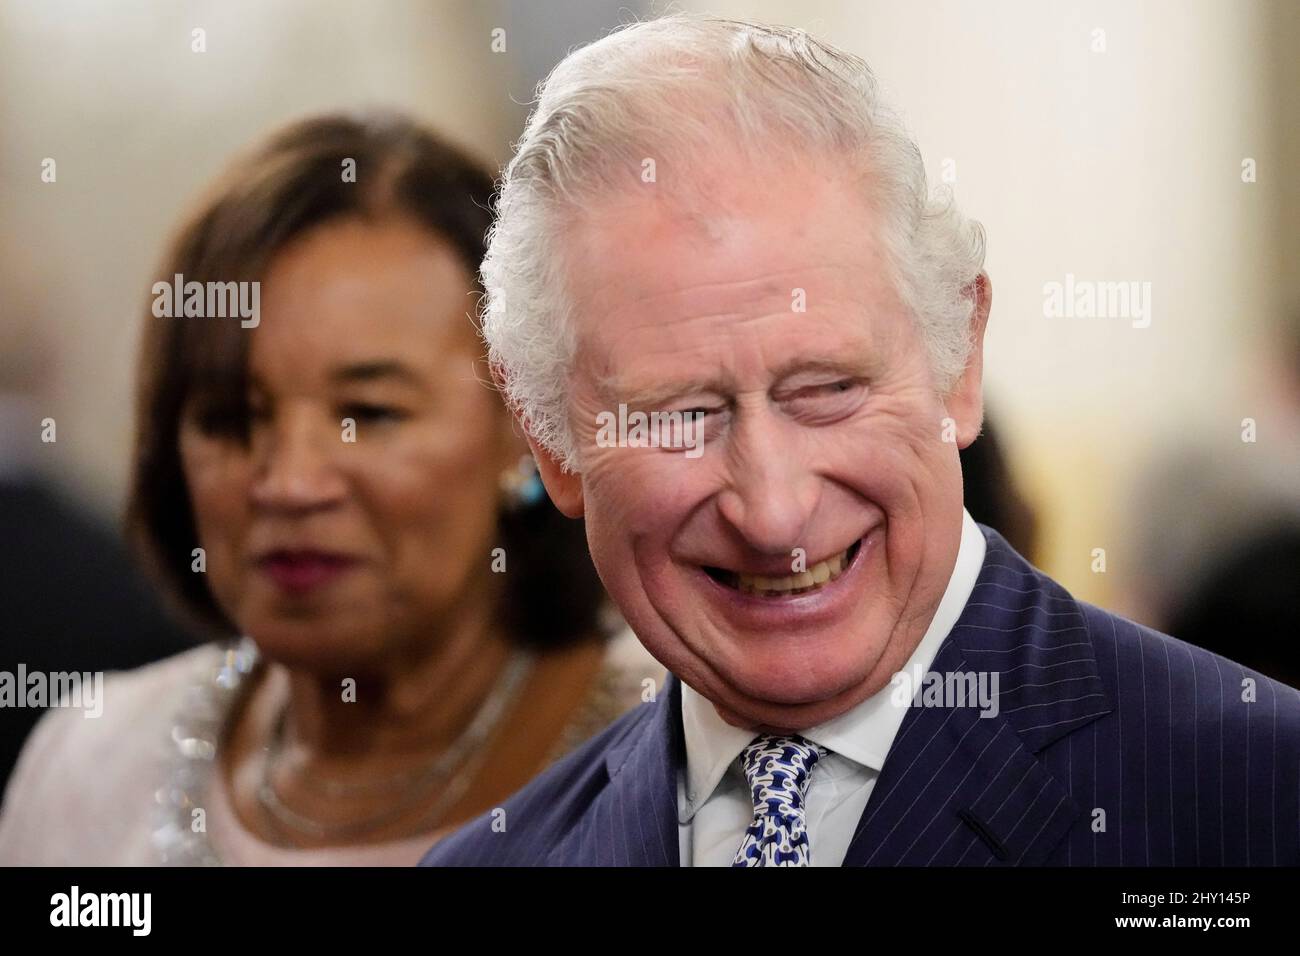 Britain's Prince Charles attends the annual Commonwealth Day Reception, which traditionally takes place on Commonwealth Day at Marlborough House, the home of the Commonwealth Secretariat, in London, Britain March 14, 2022. Frank Augstein/Pool via REUTERS Stock Photo